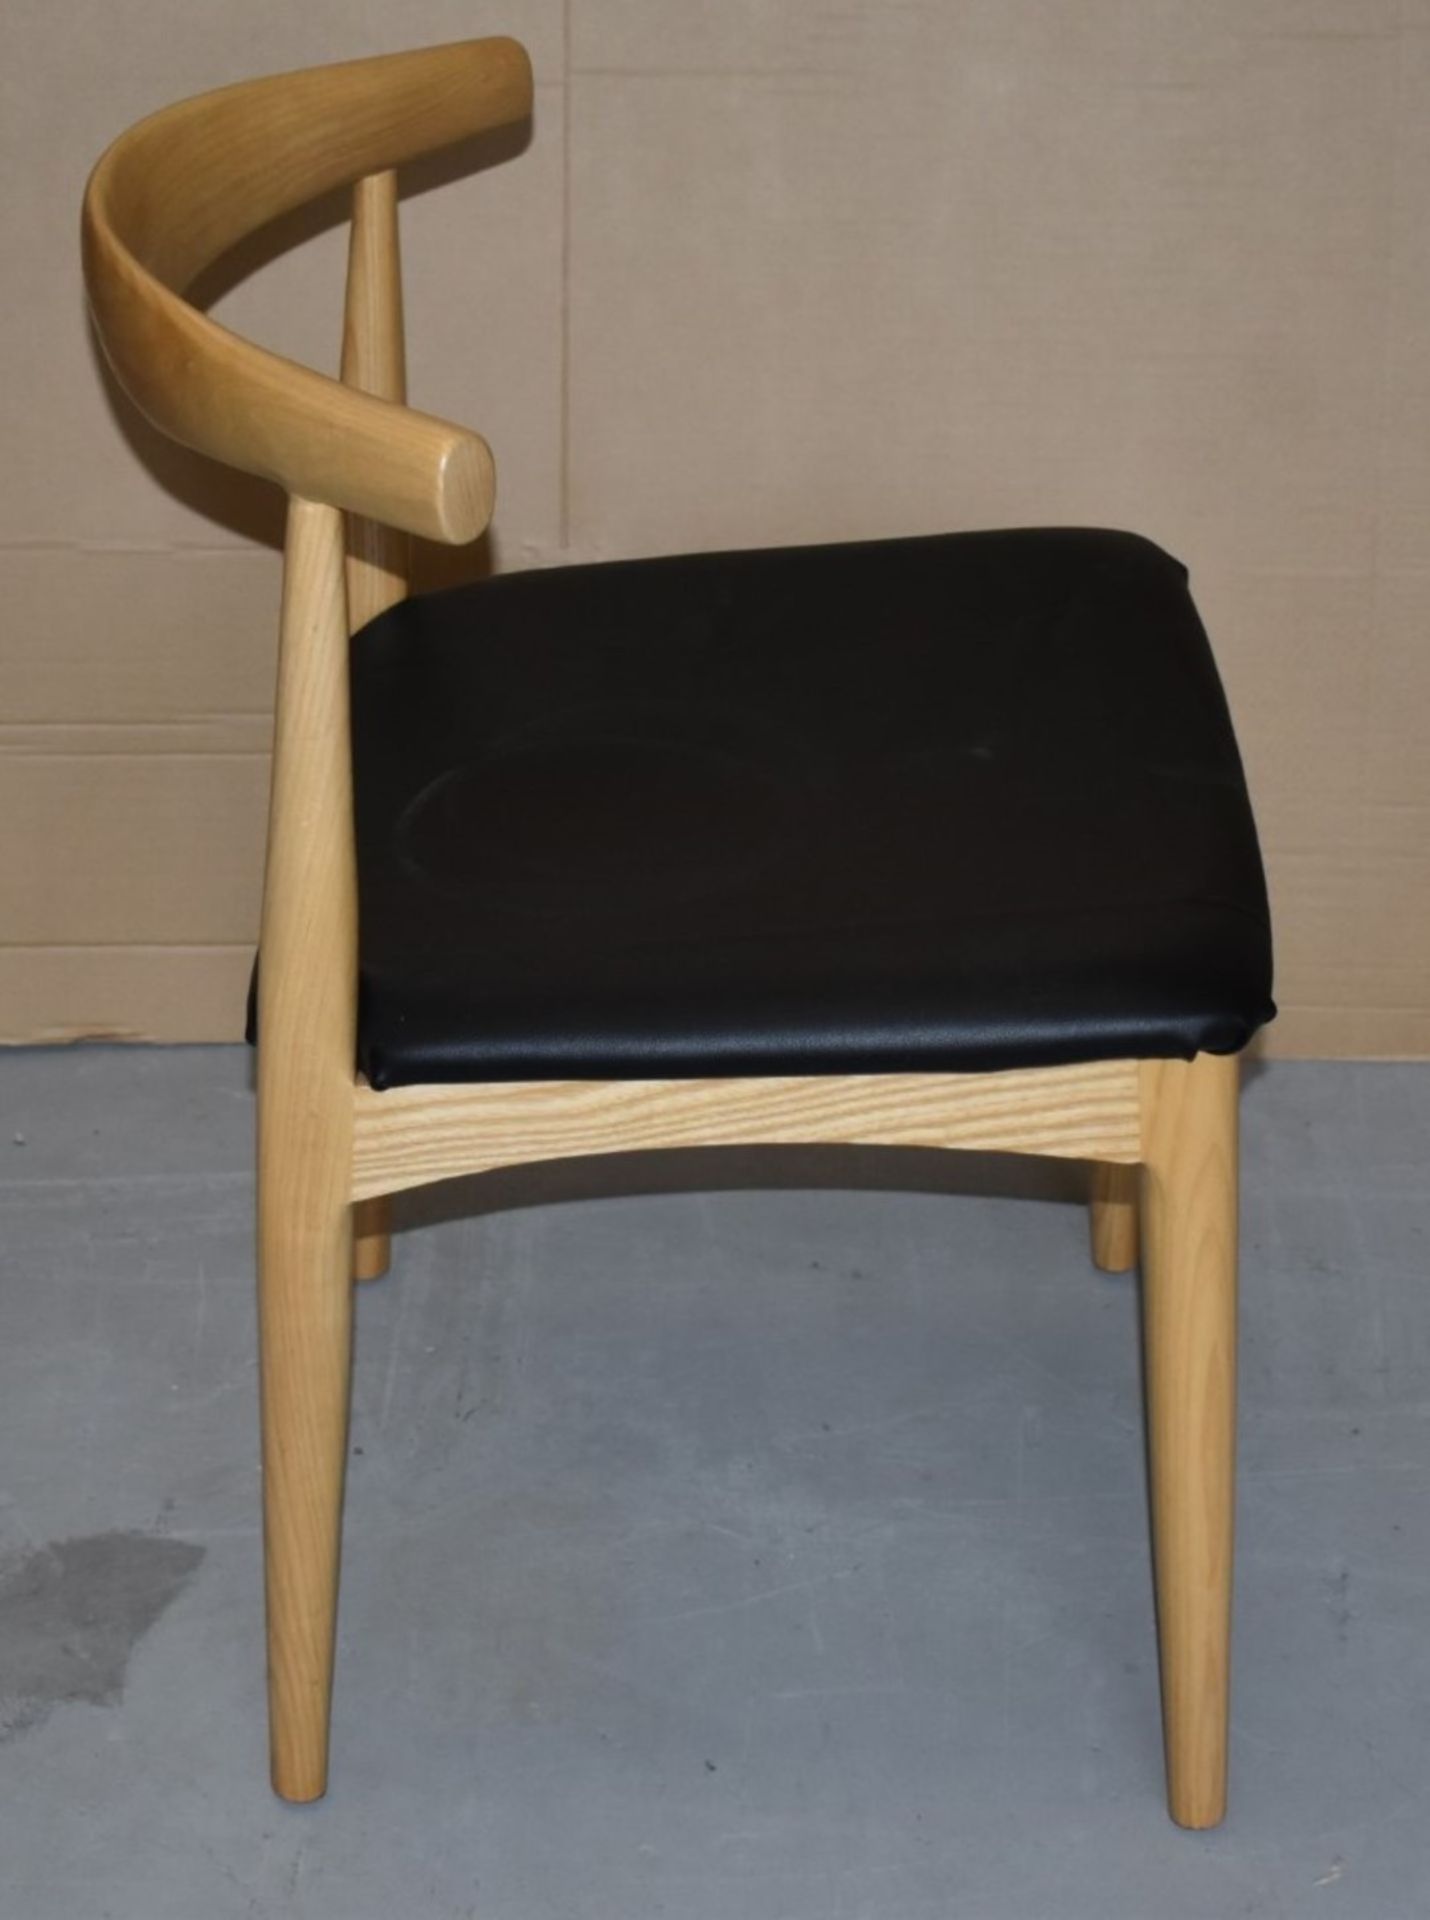 1 x Hans Wegner Inspired Elbow Chair - Solid Wood Chair With Light Stain Finish and Black Seat Pad - - Image 3 of 9